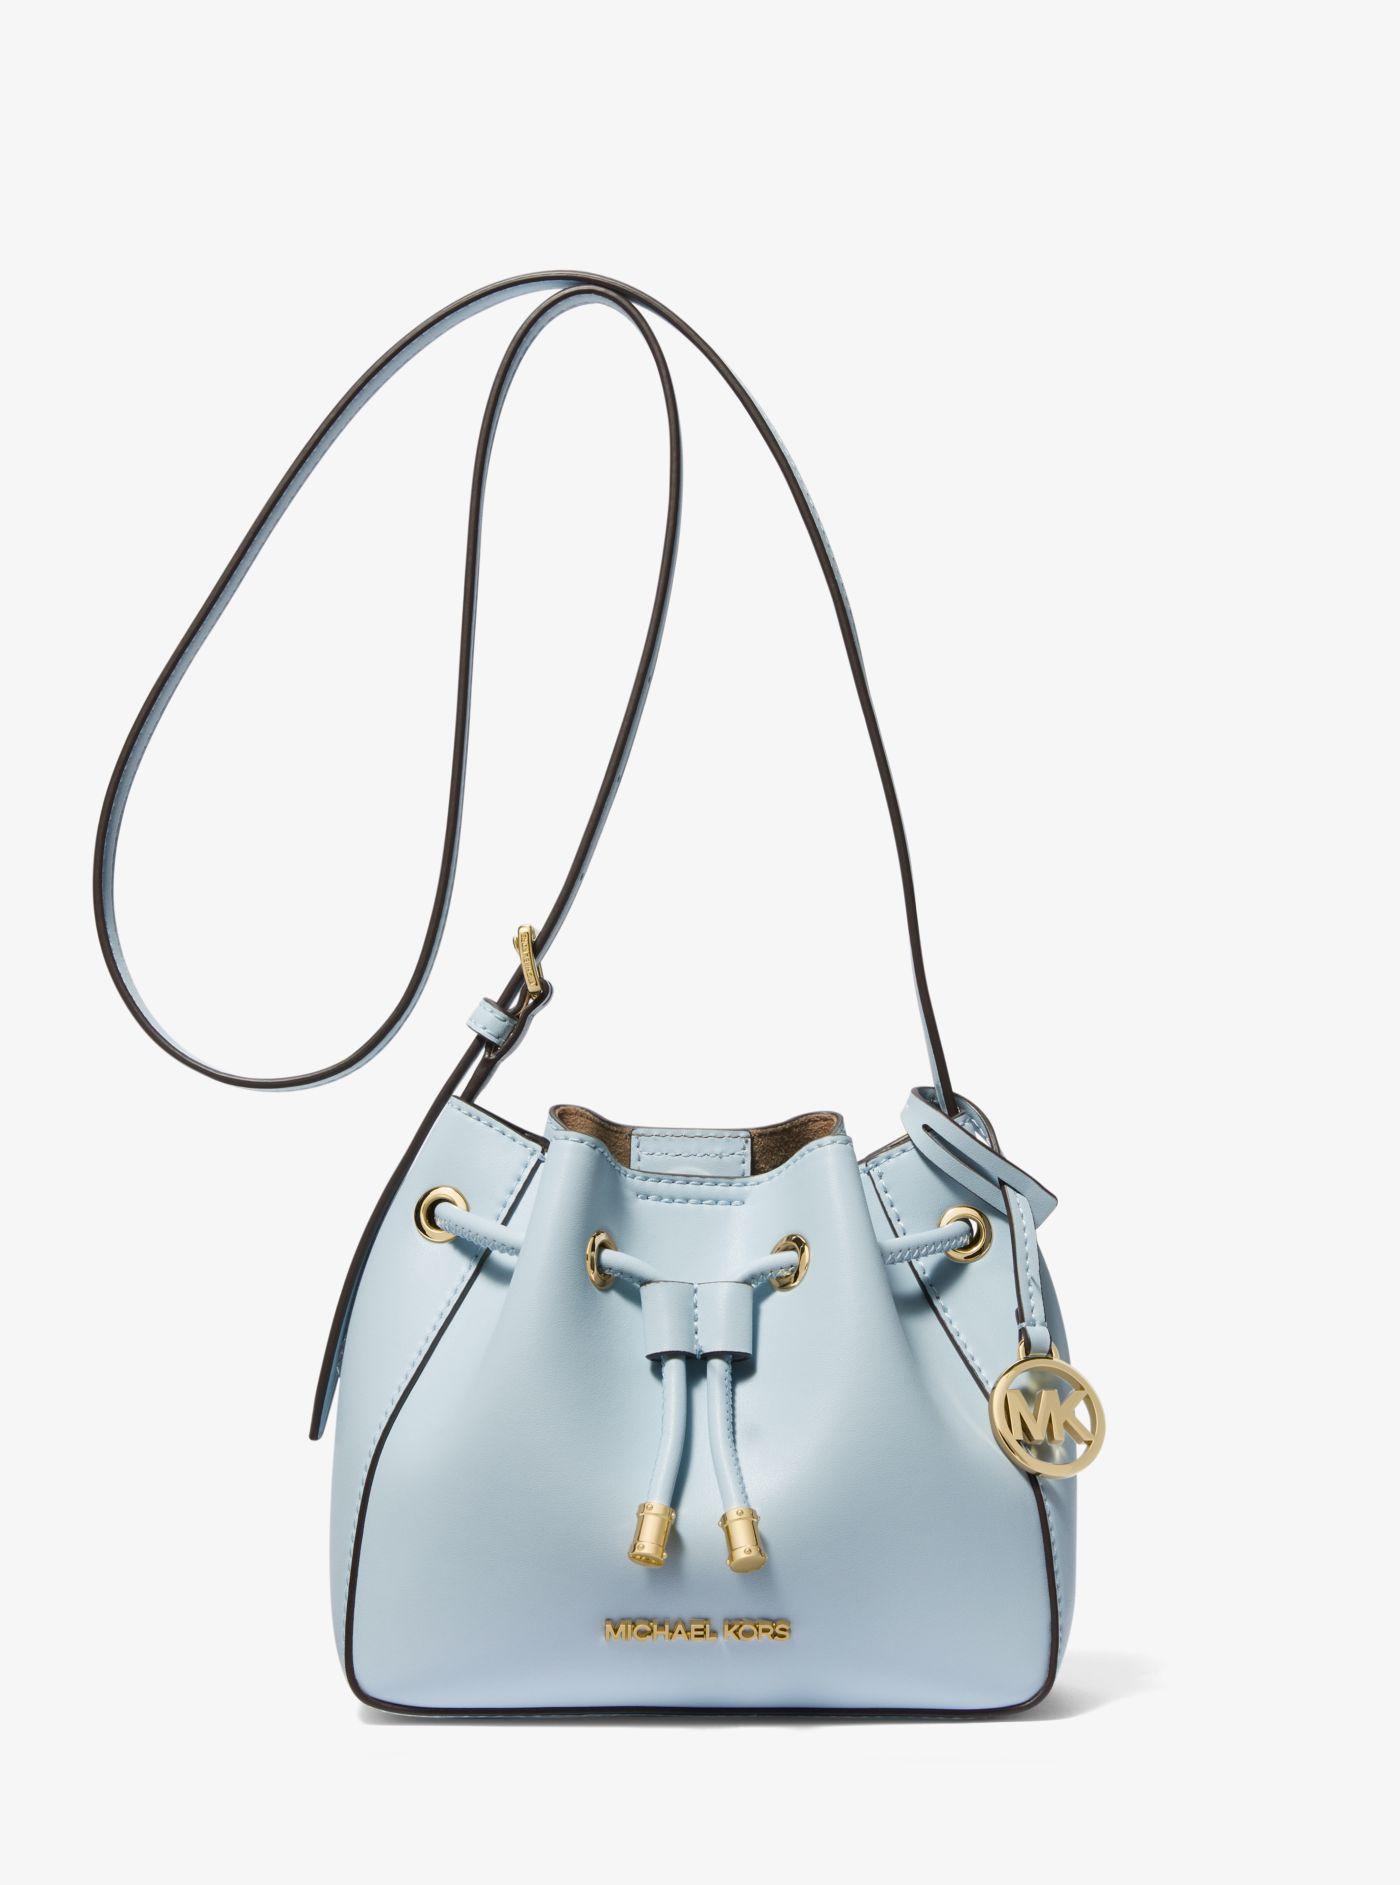 Michael Kors Phoebe Small Faux Leather Bucket Bag in Blue | Lyst Canada